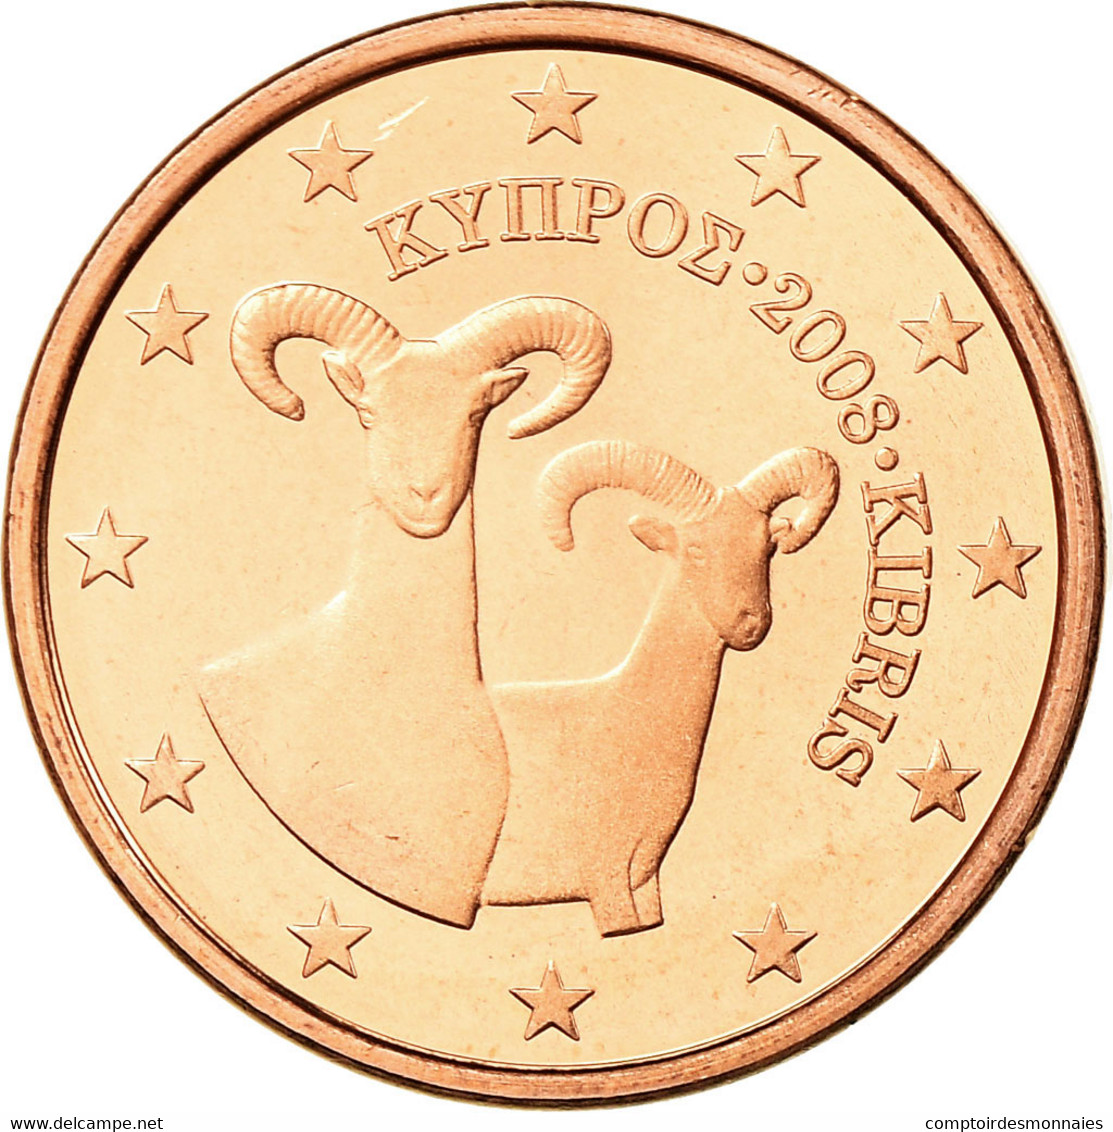 Chypre, 5 Euro Cent, 2008, FDC, Copper Plated Steel, KM:80 - Cyprus